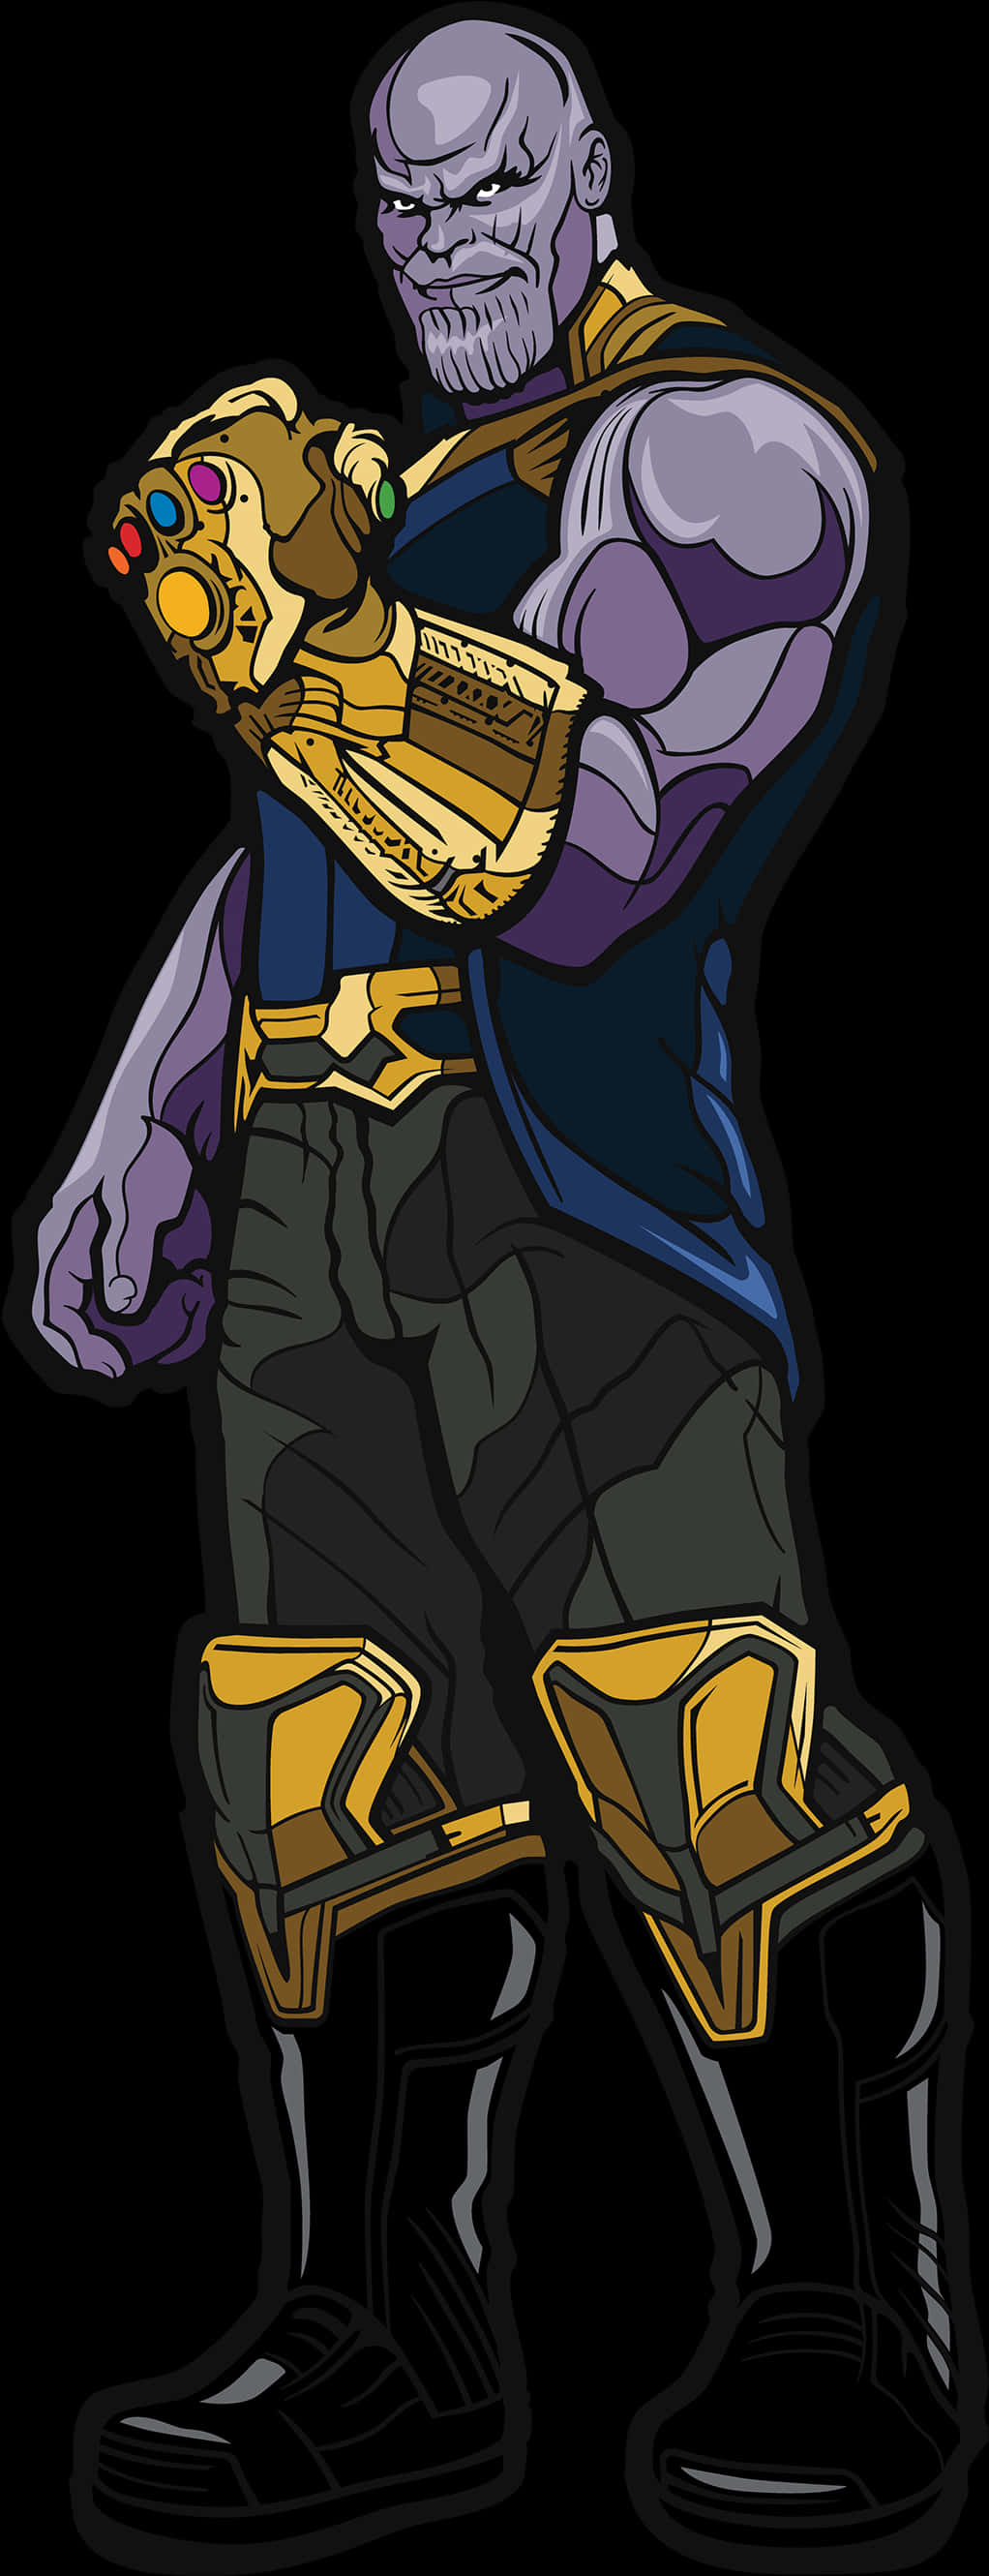 Thanos With Infinity Gauntlet Illustration PNG image